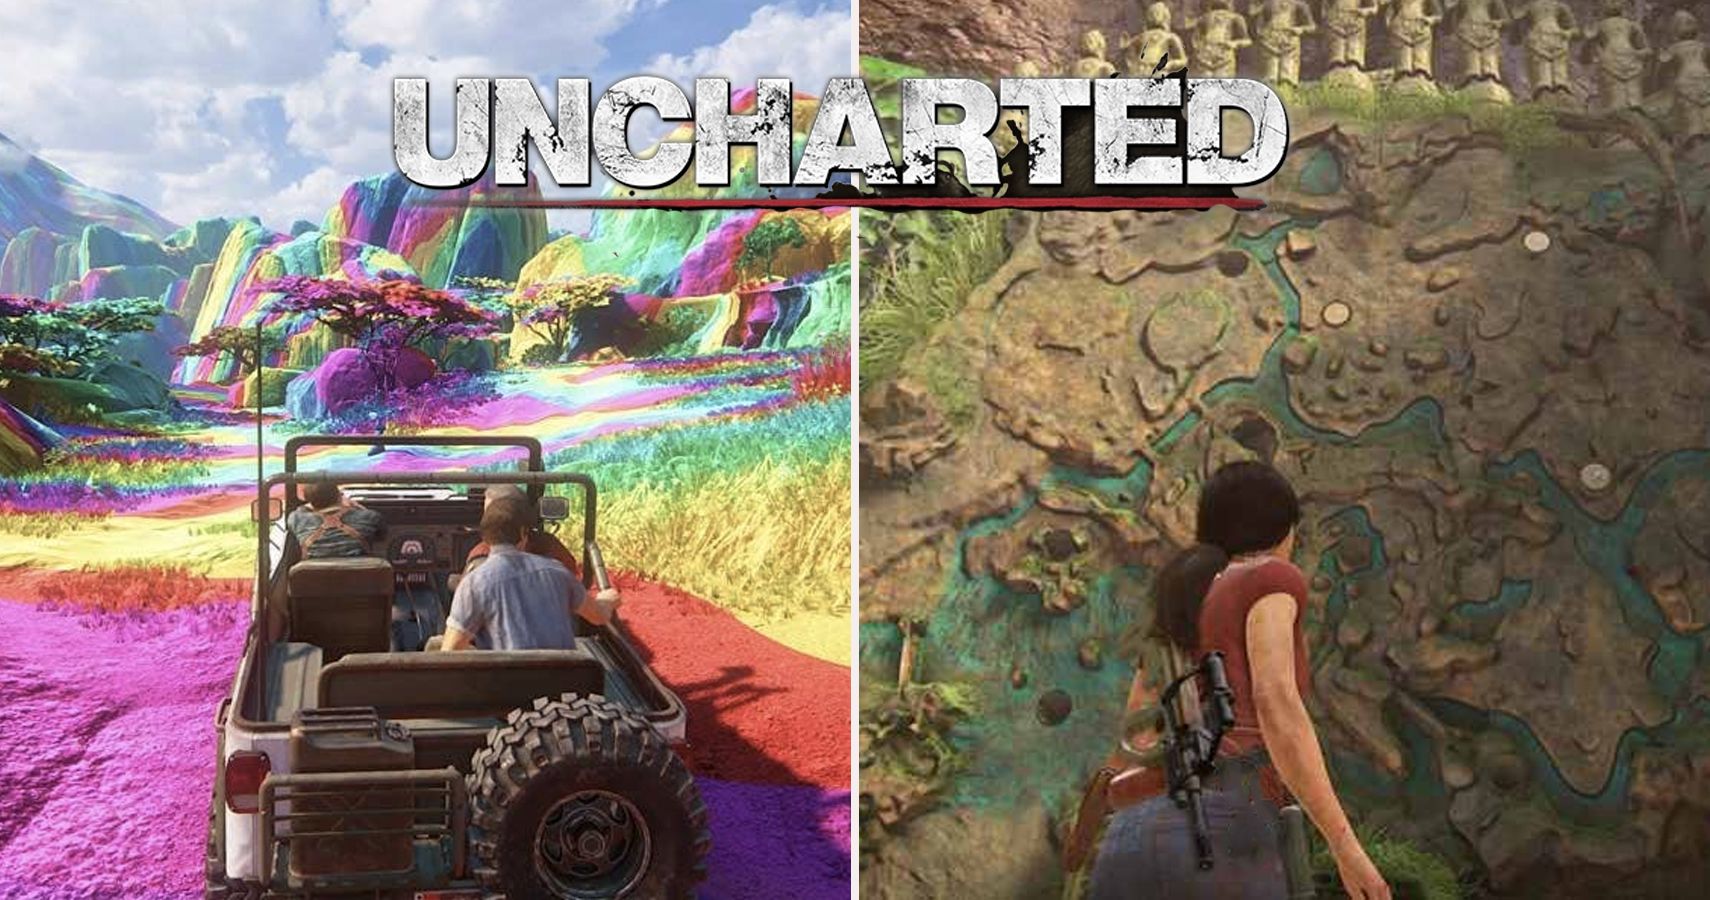 Uncharted 4 Thief's End Might Be The End Of Nathan Drake - mxdwn Games